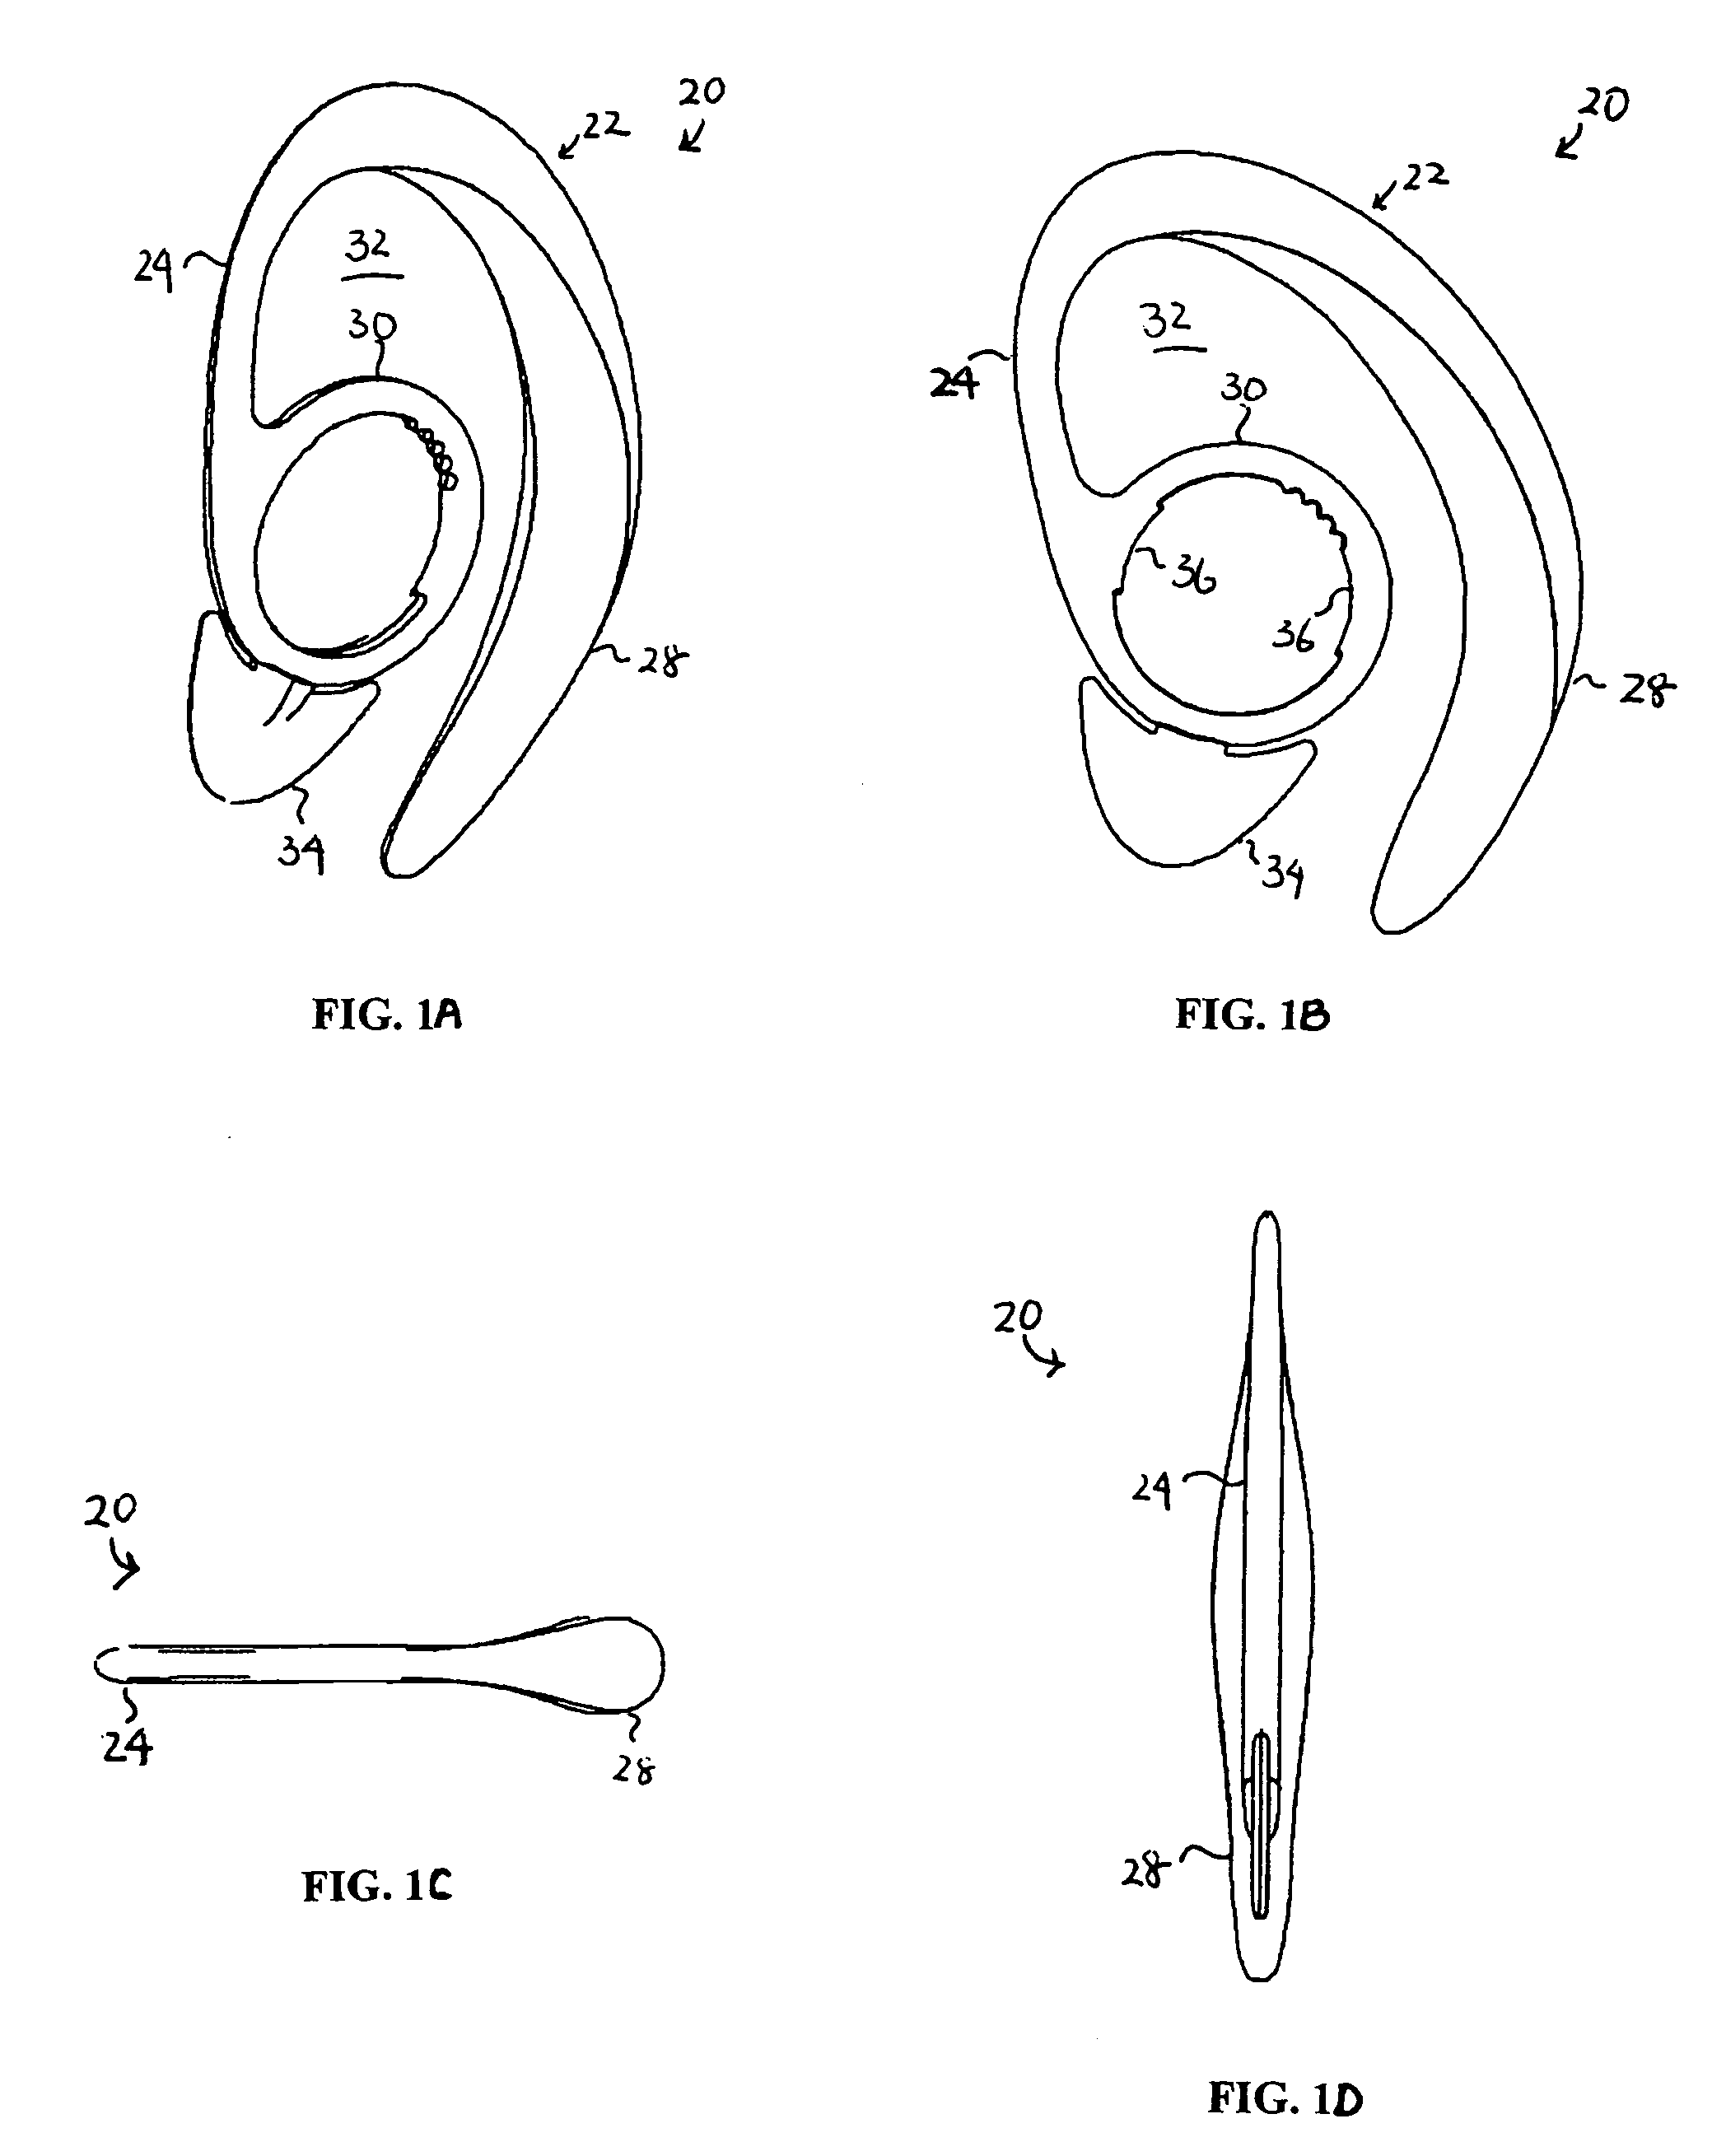 Self-adjusting earloop for an over-the-ear headset